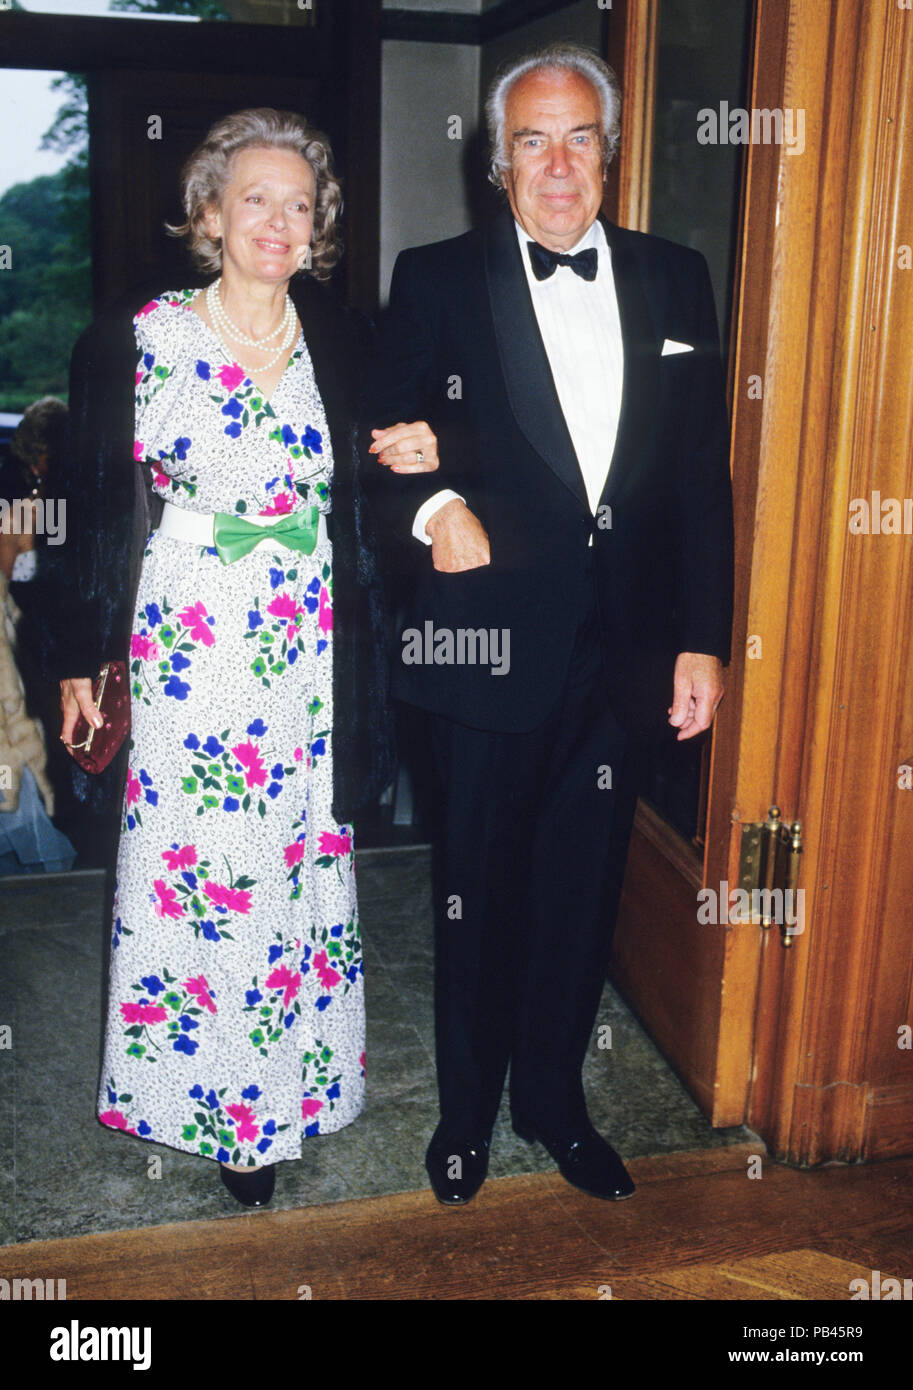 ERLING PERSSON 1988 founder of The Fashionshops H&M with lady at gala  dinner Stock Photo - Alamy